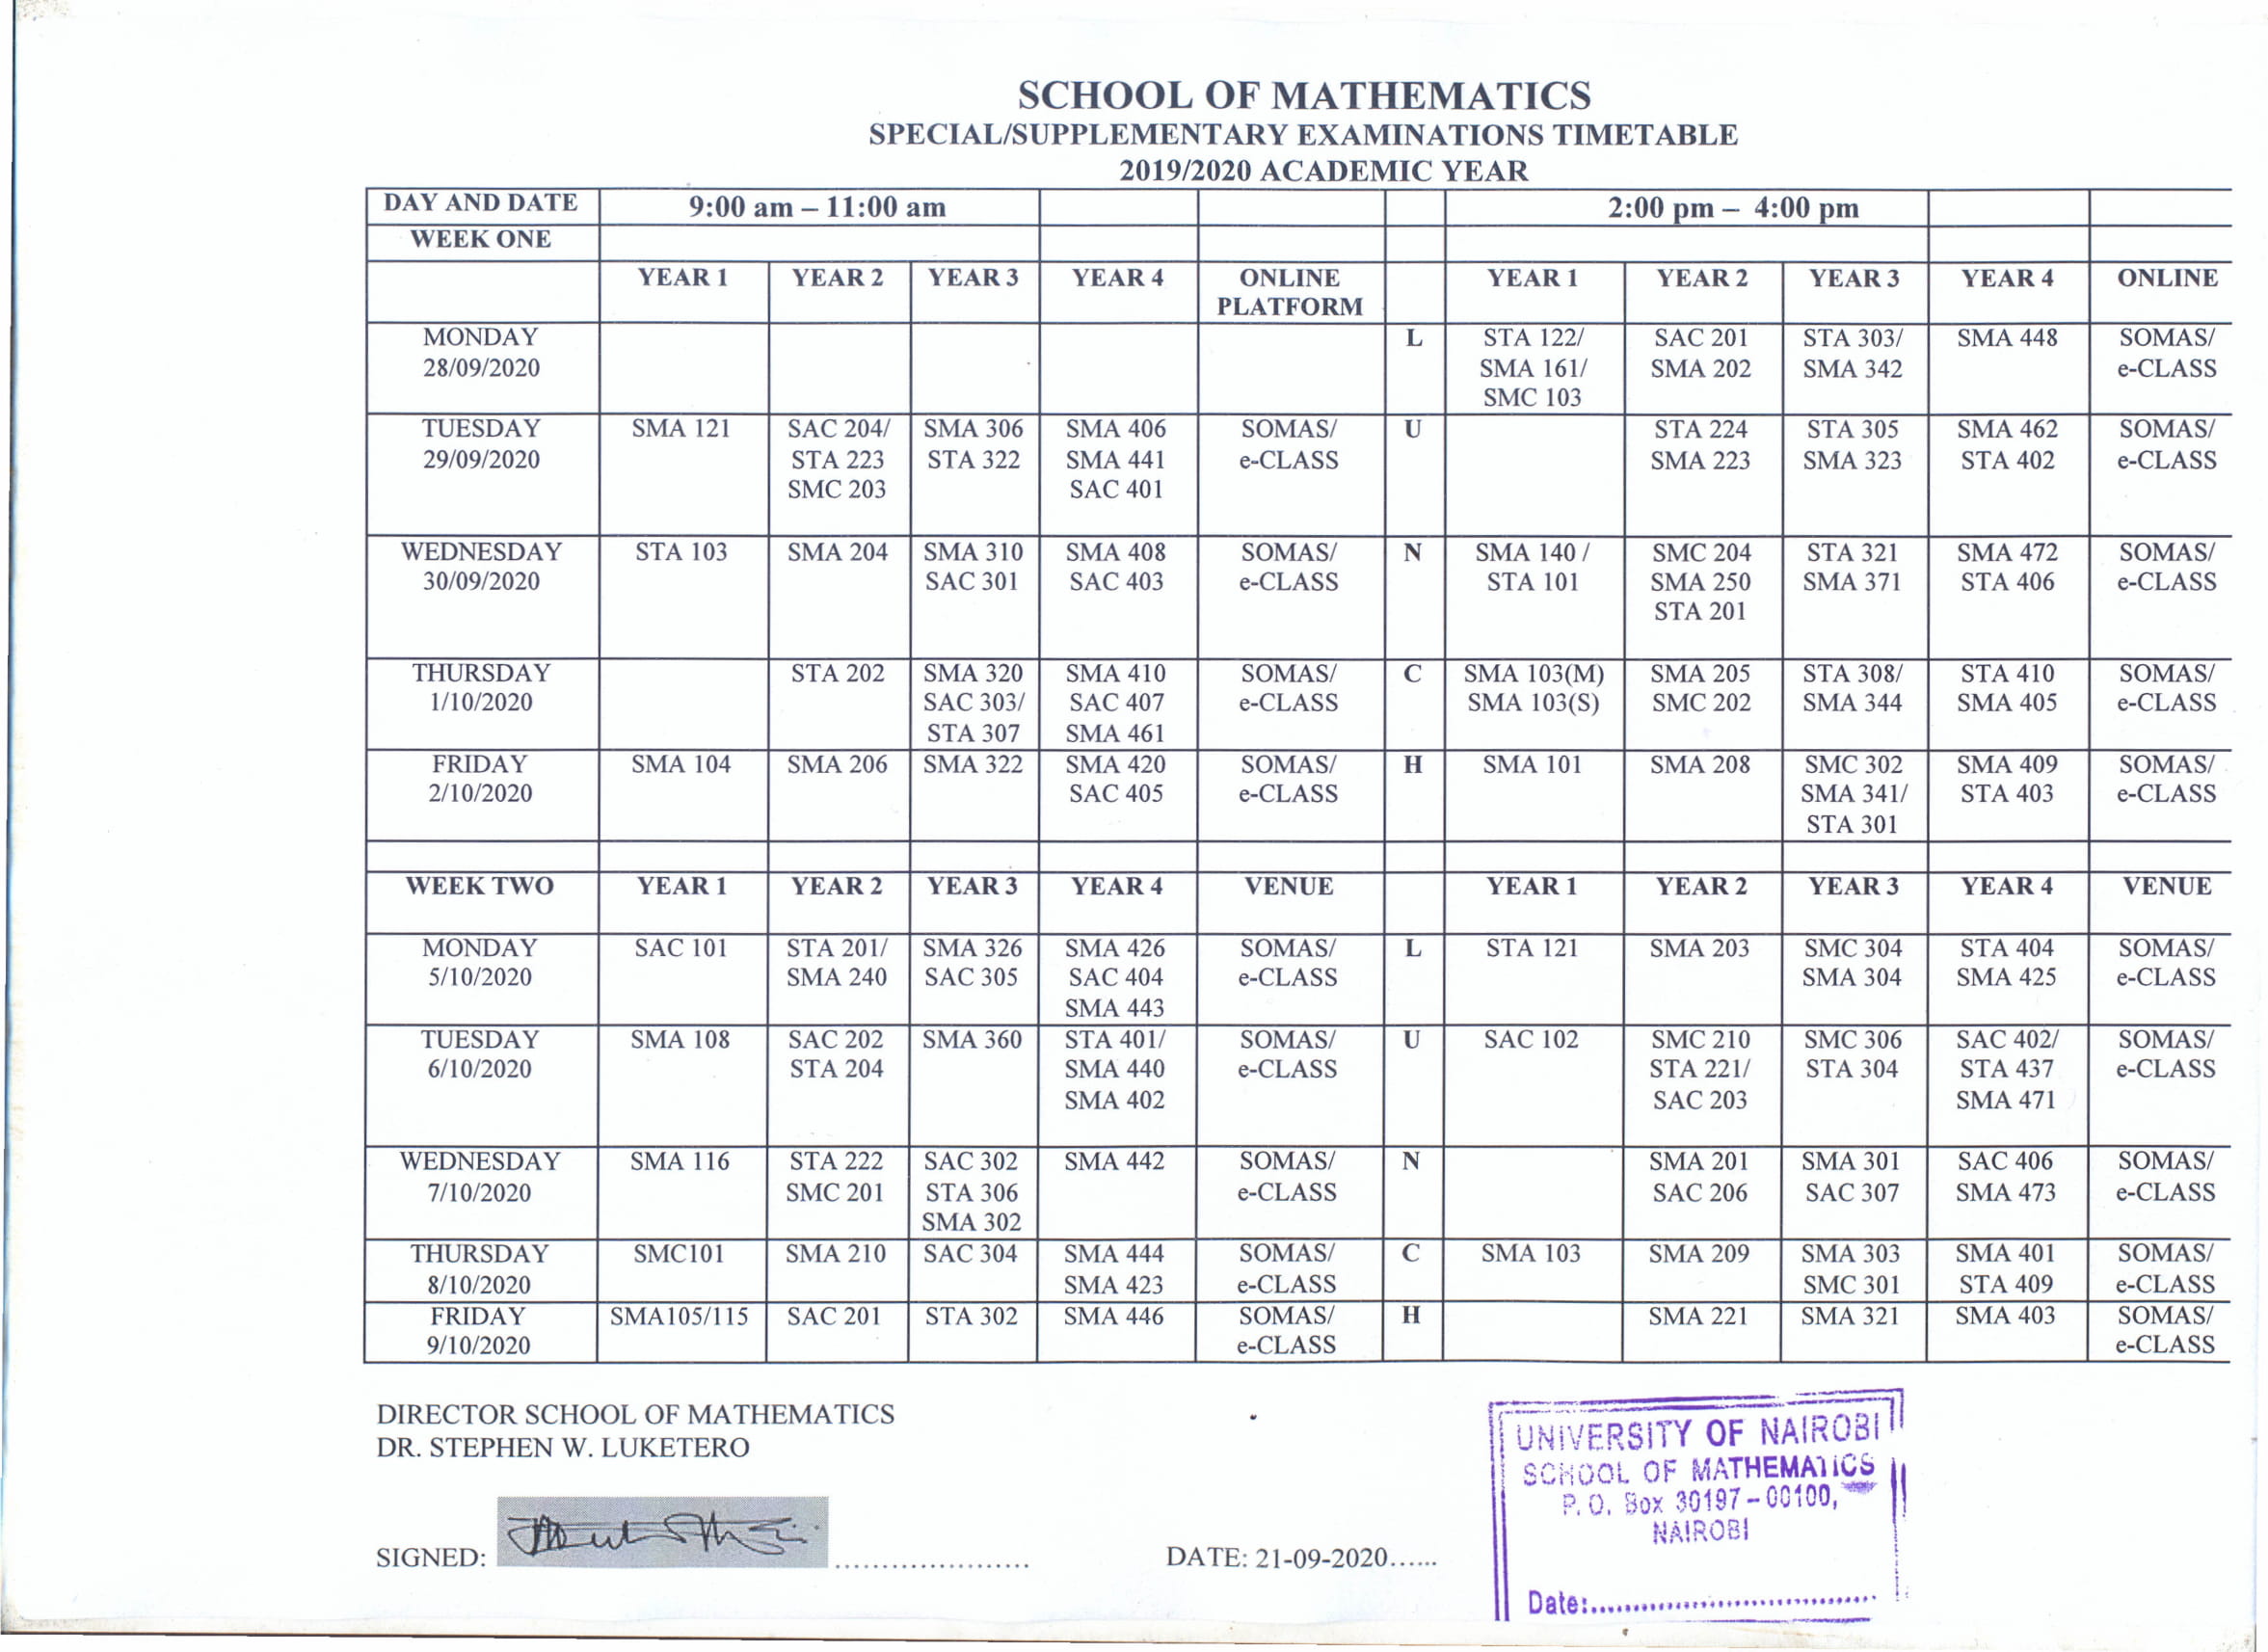  special/supplementary examination Timetable-Under graduate